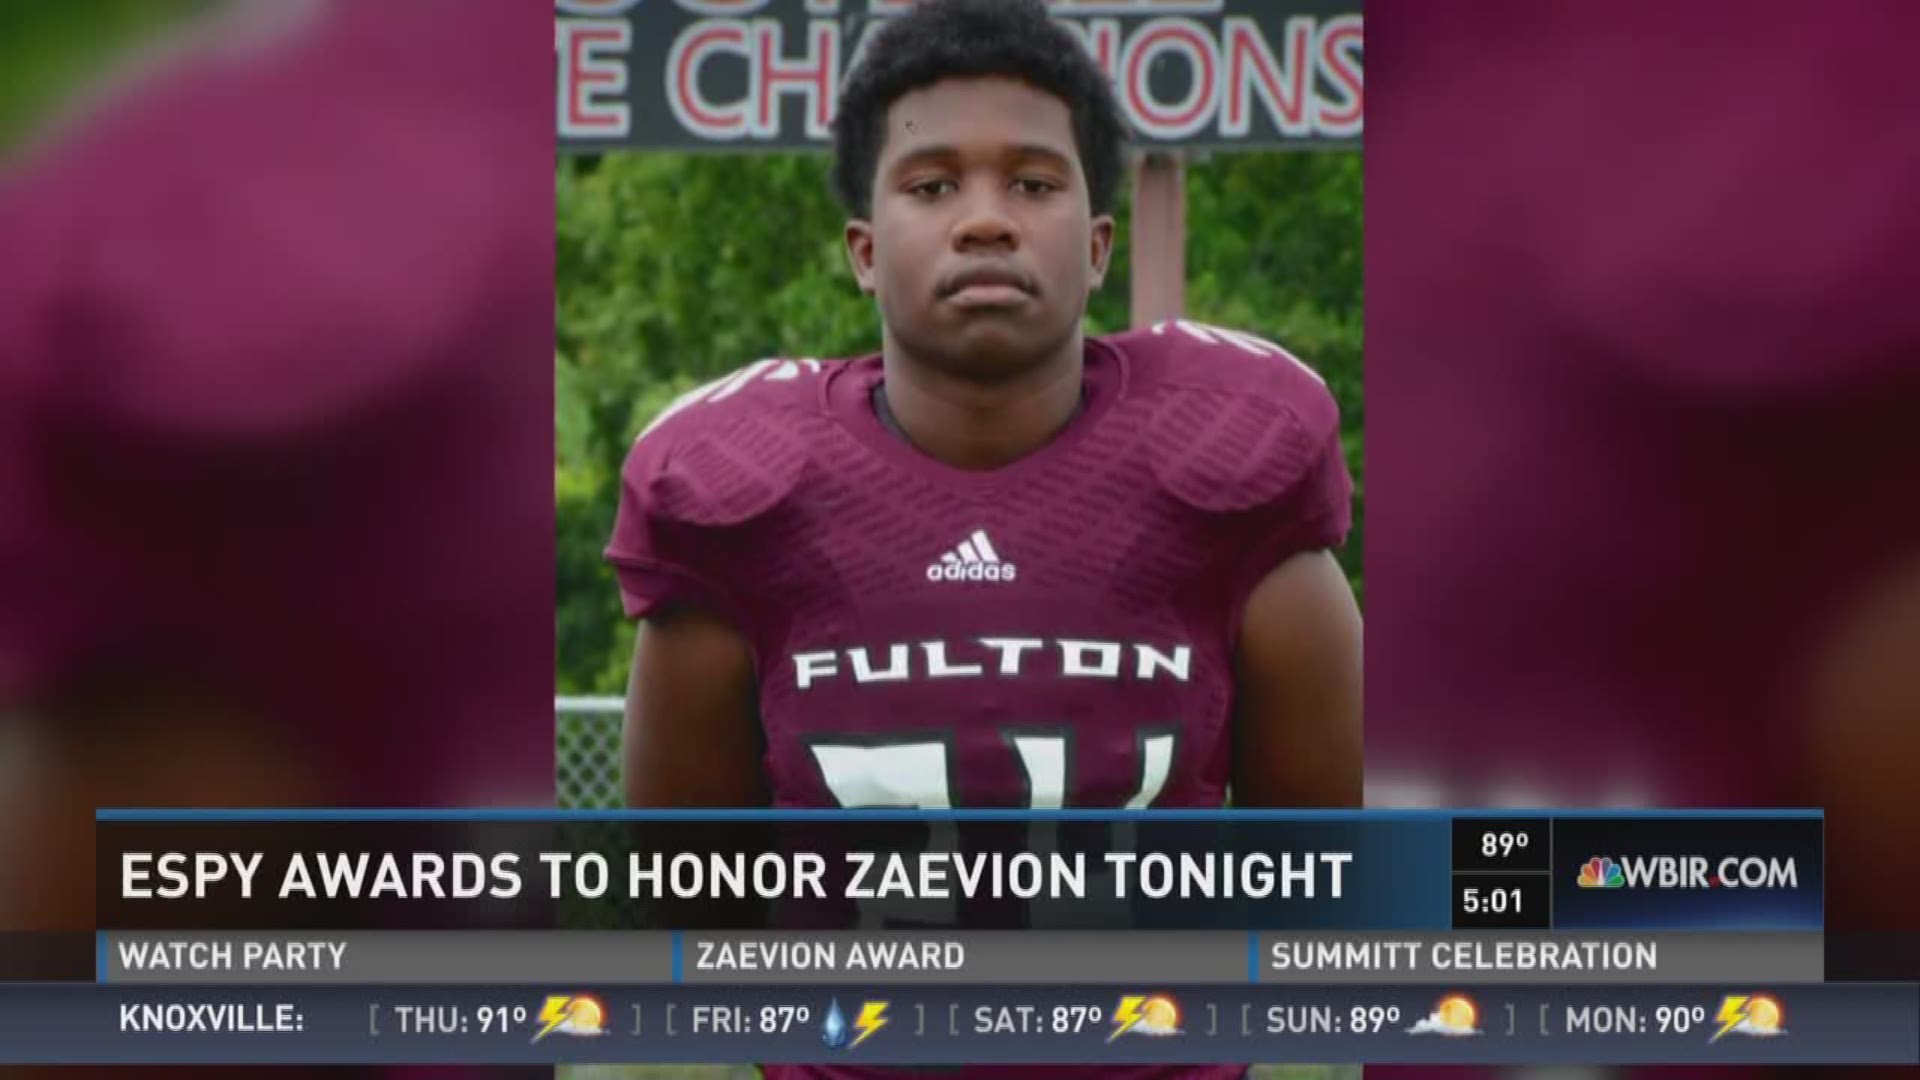 Tonight Zaevion Dobson will be awarded the Arthur Ashe award at the Espy's posthumously. He died shielding two girls from gang related gunfire. Russel is live downtown at the Espy's watch party and Robin is live in LA. 7/13/16